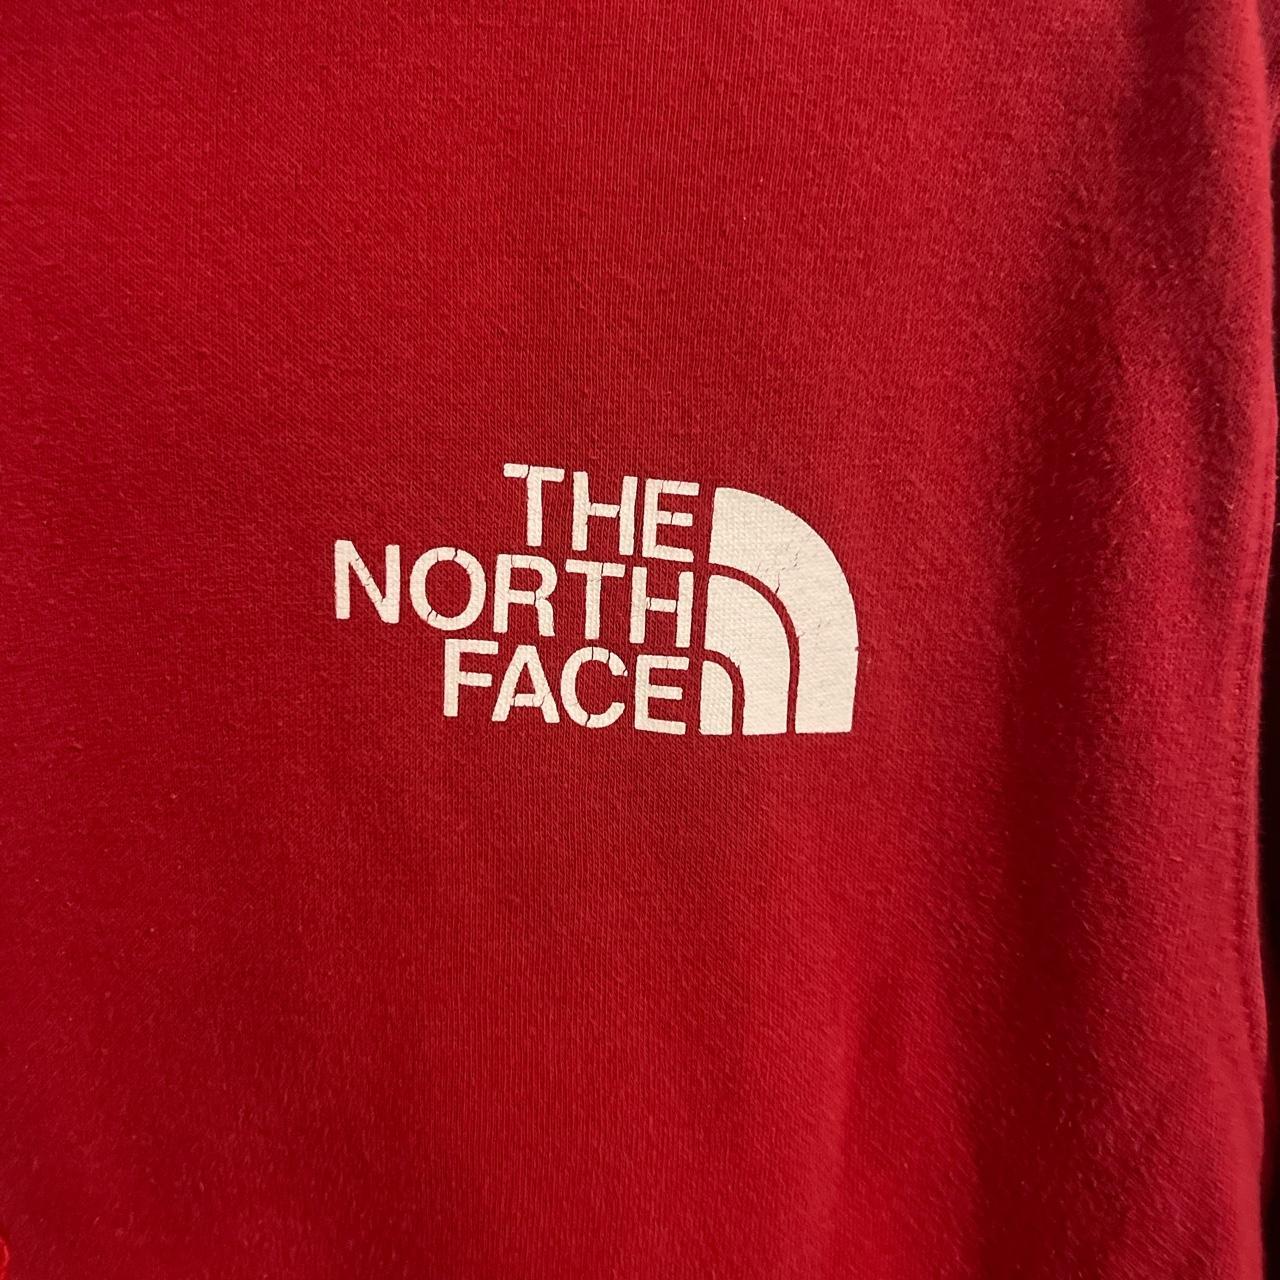 The North Face Men's Red and Black Hoodie (2)